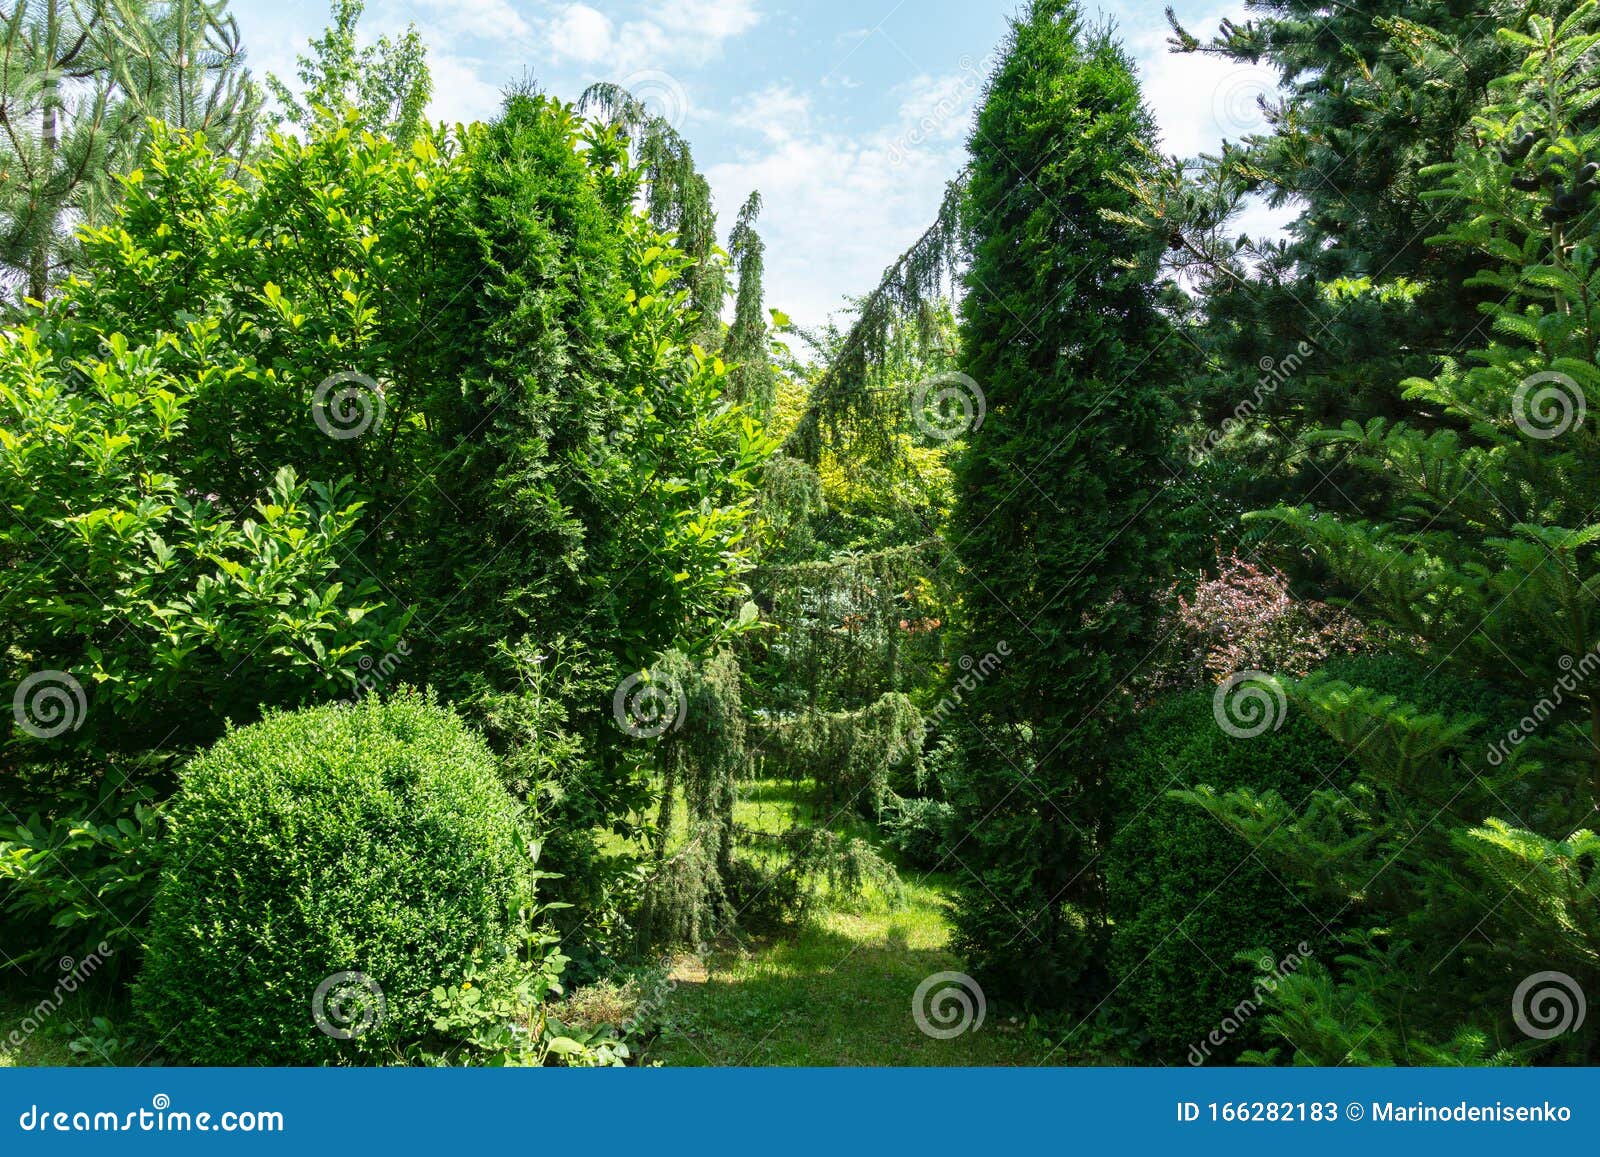 beautiful landscaped garden with evergreens. boxwood buxus sempervirens trees, thuja occidentalis columna,